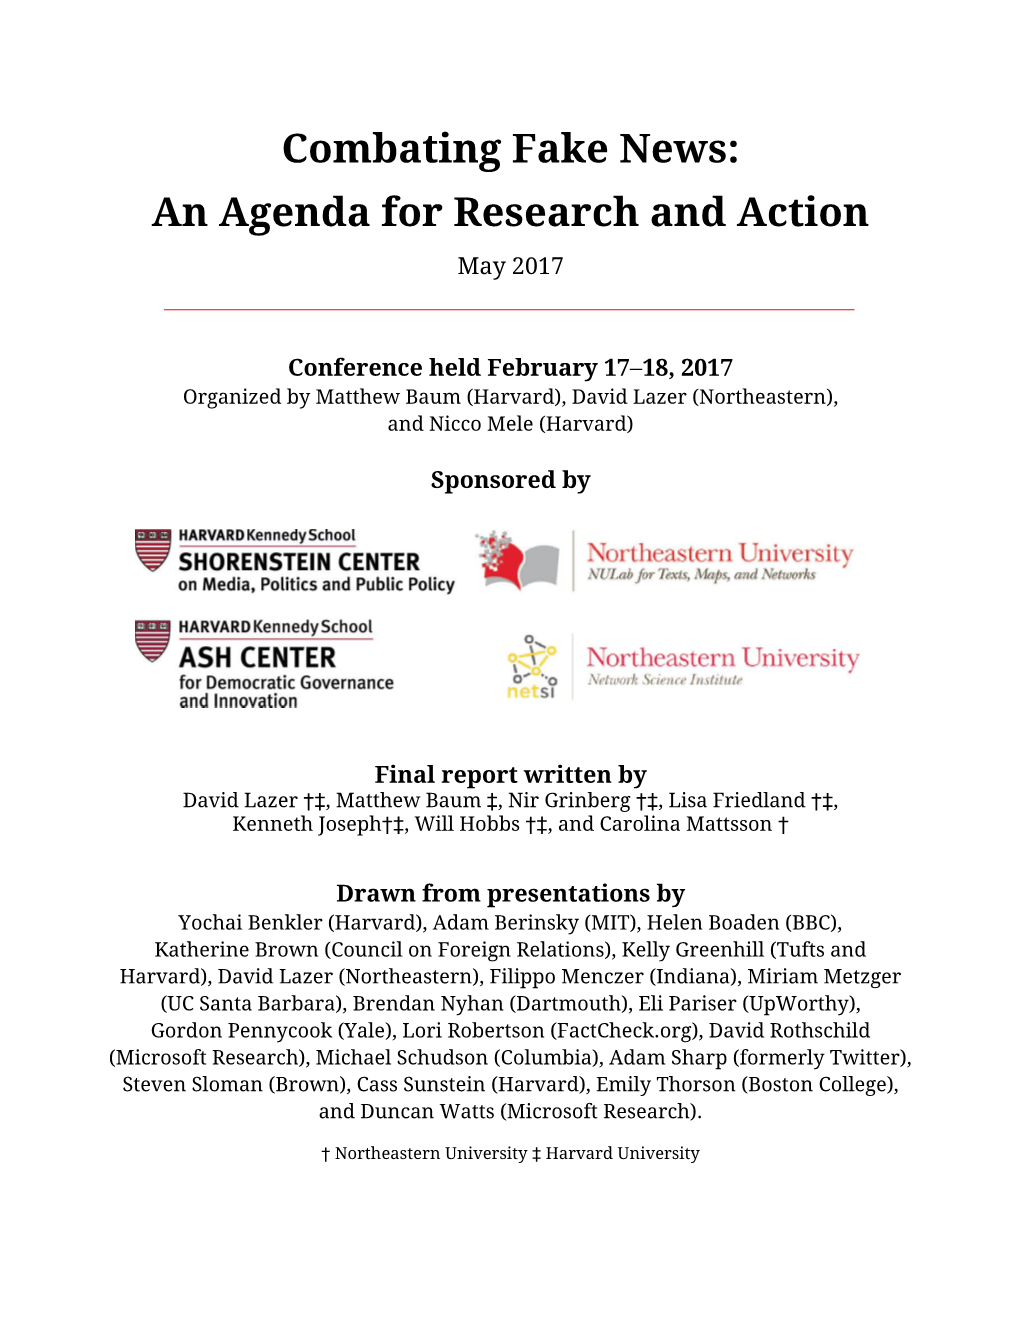 Combating Fake News: an Agenda for Research and Action May 2017